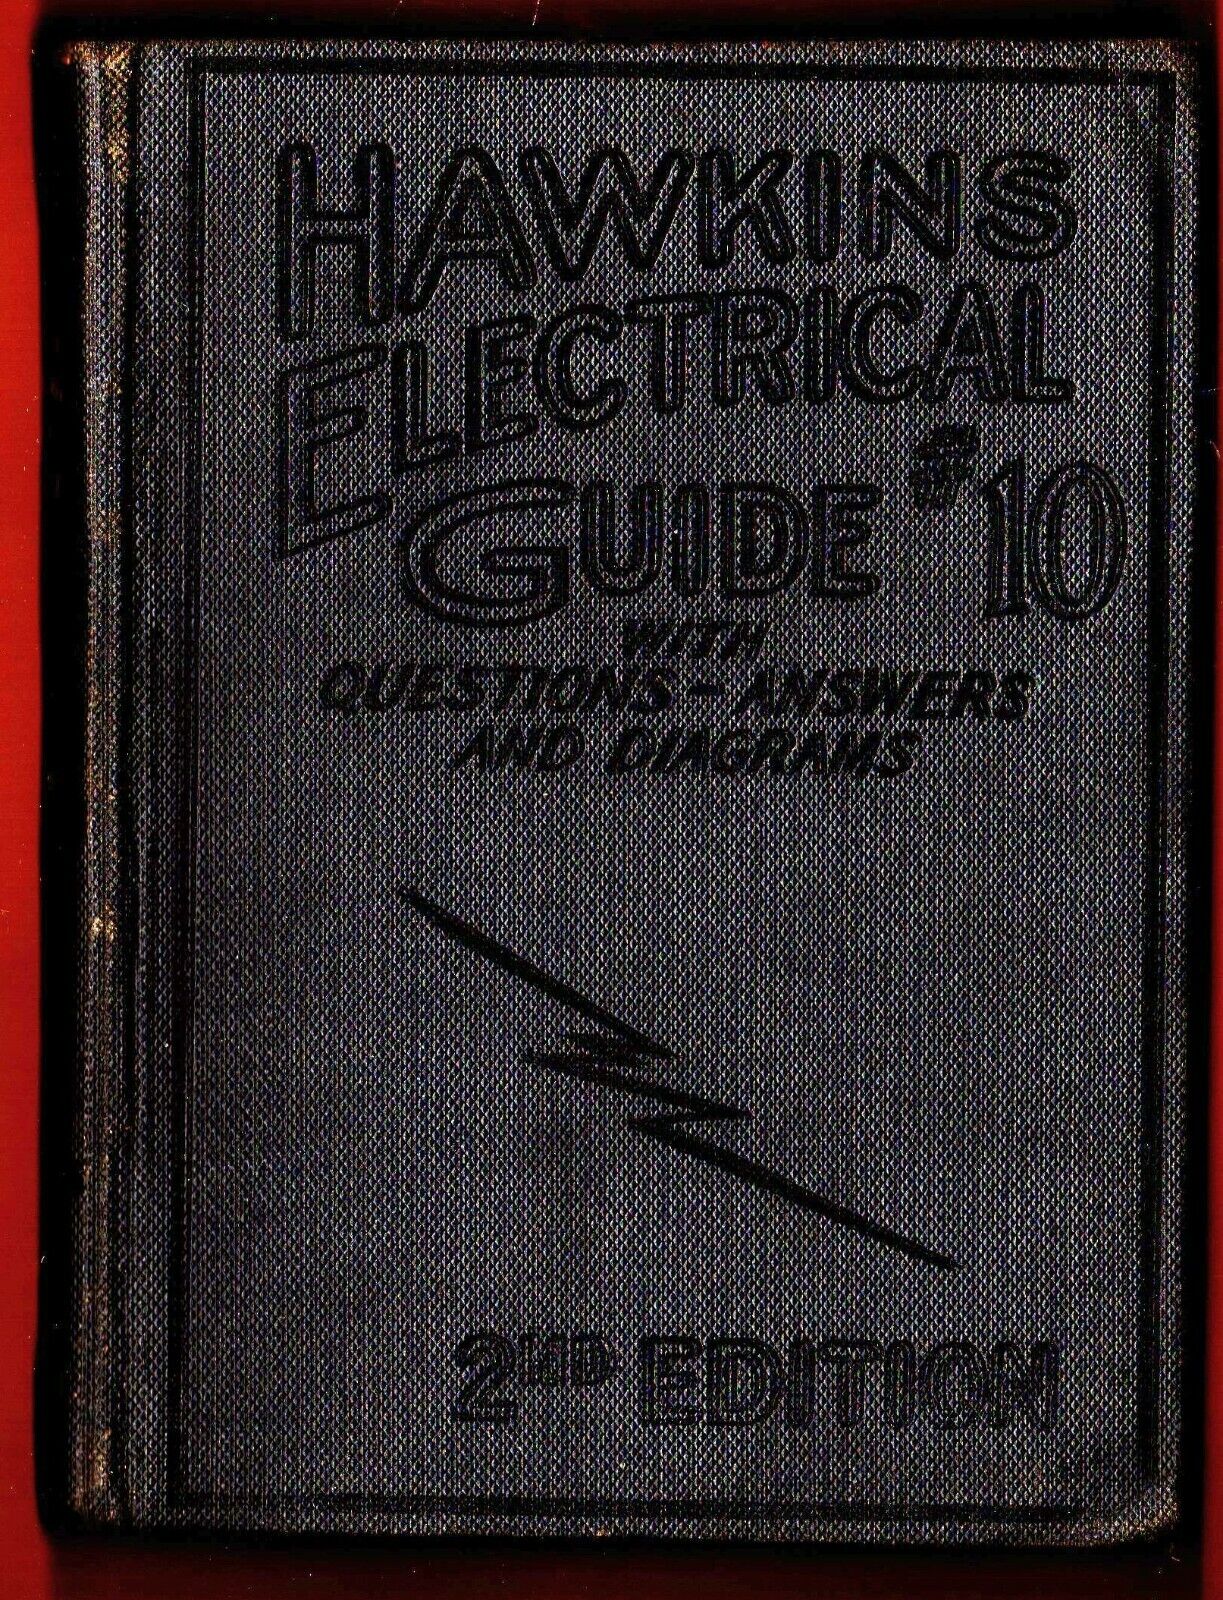 Hawkins Electrical Guide #10(Questions, Answers & Illustrations)Book-1917